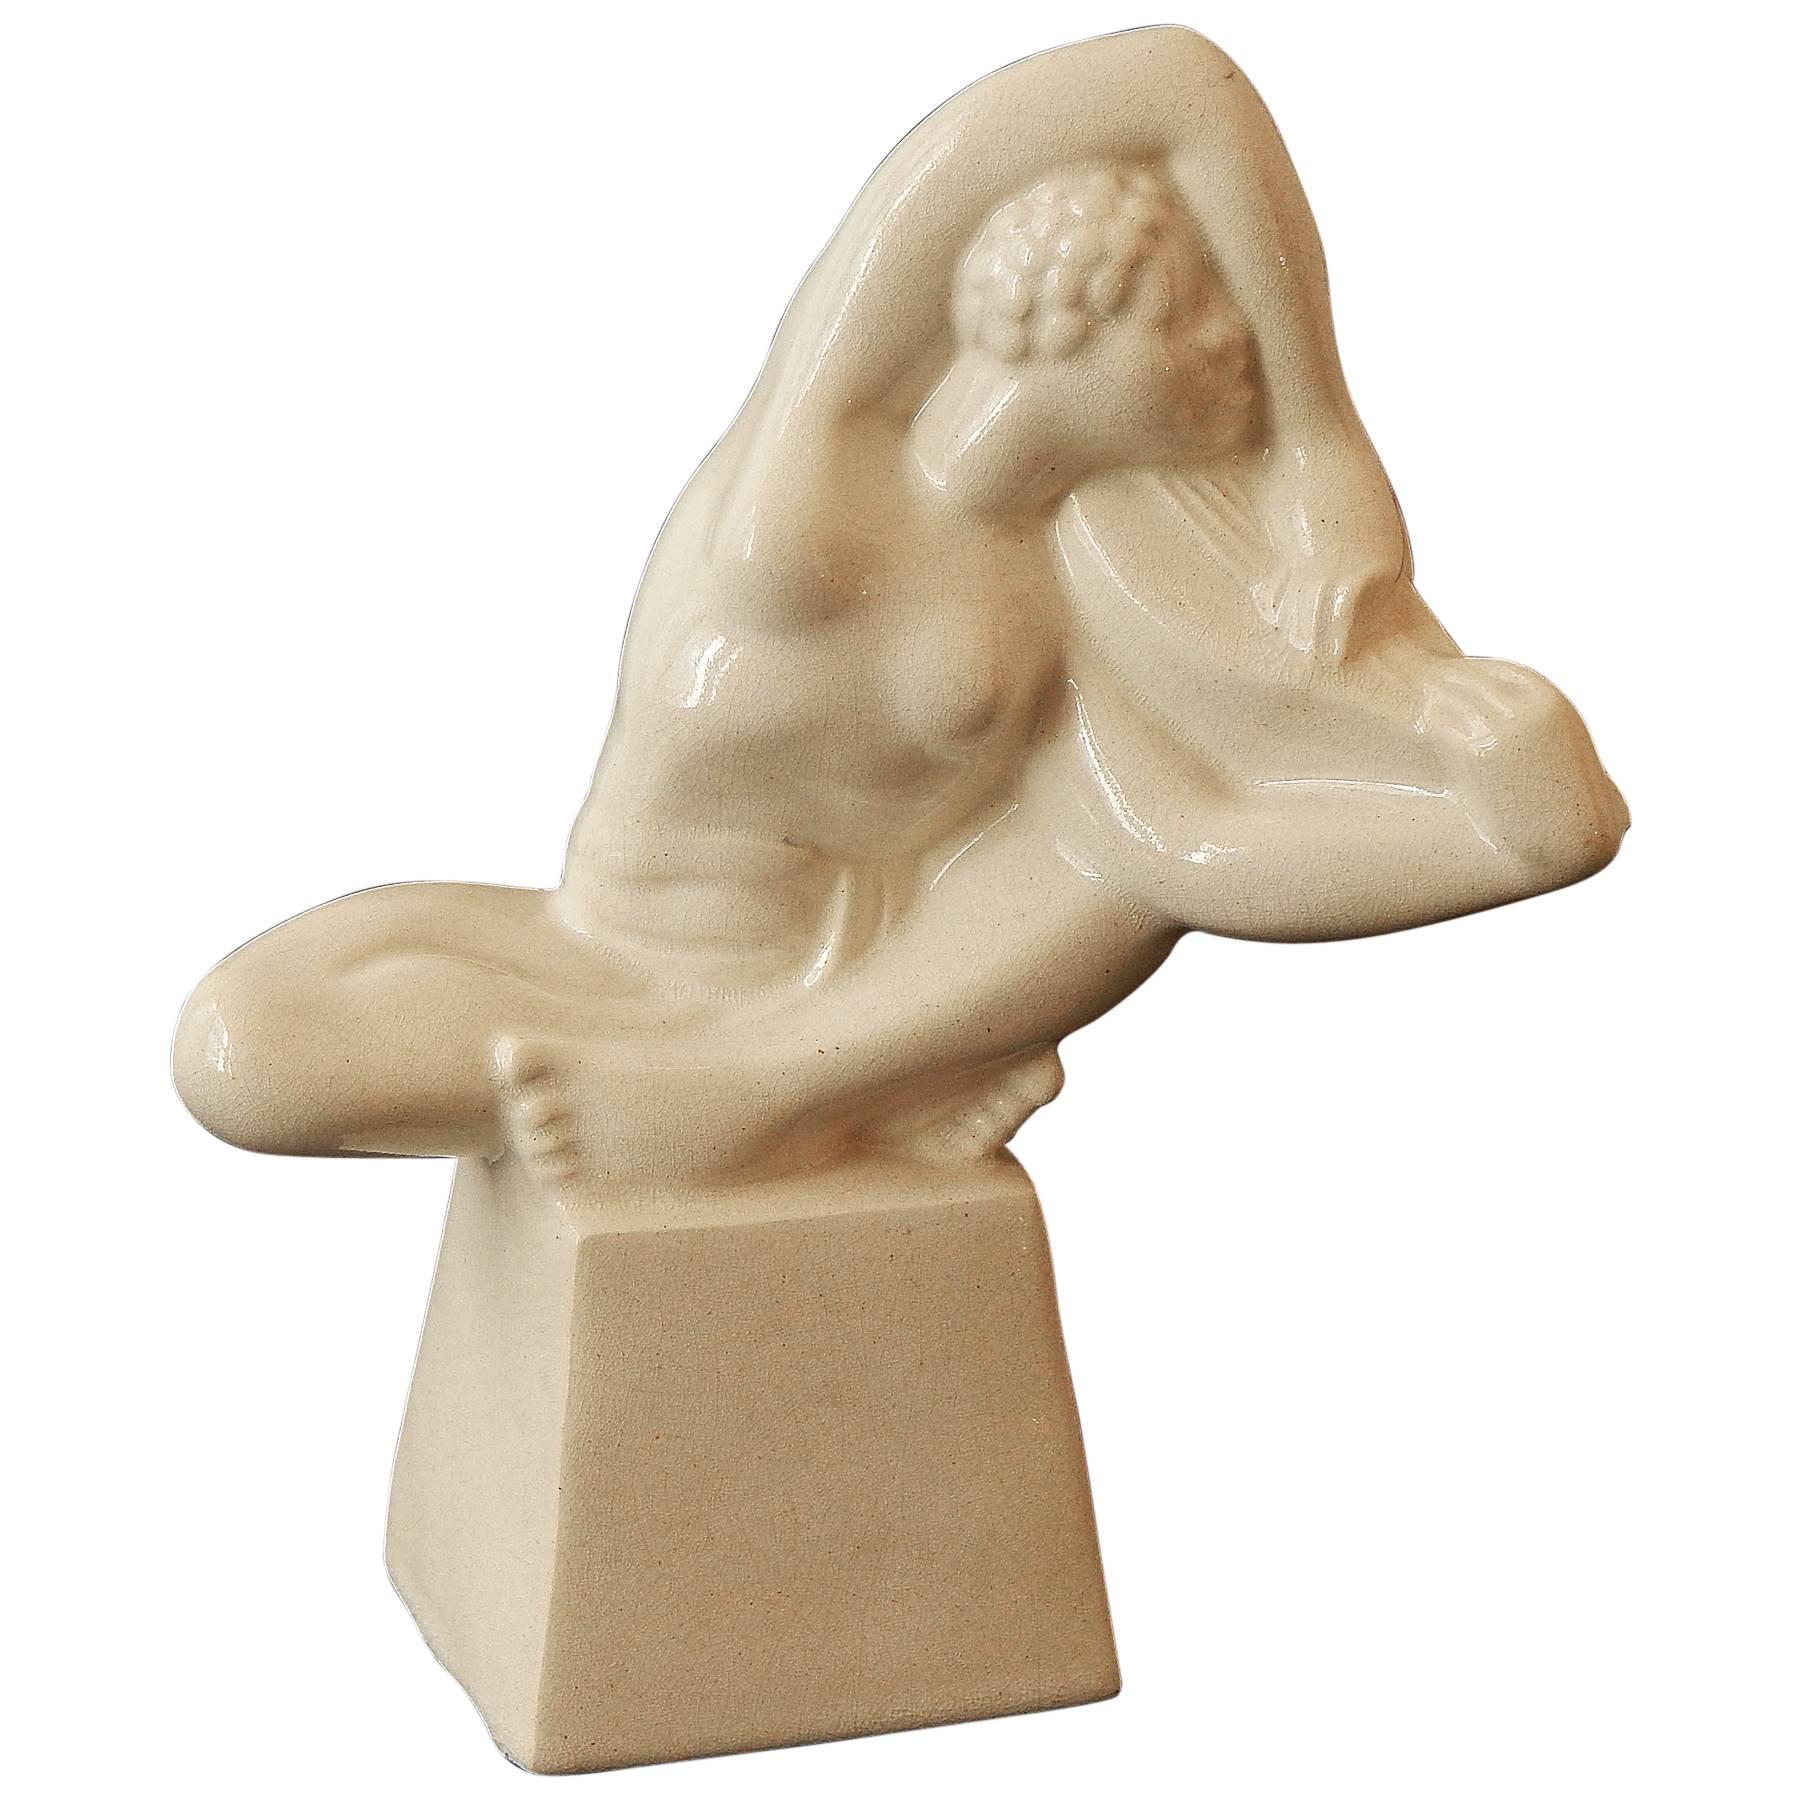 "African with Lute, " Rare Sculpture of Female Nude by Archipenko Student